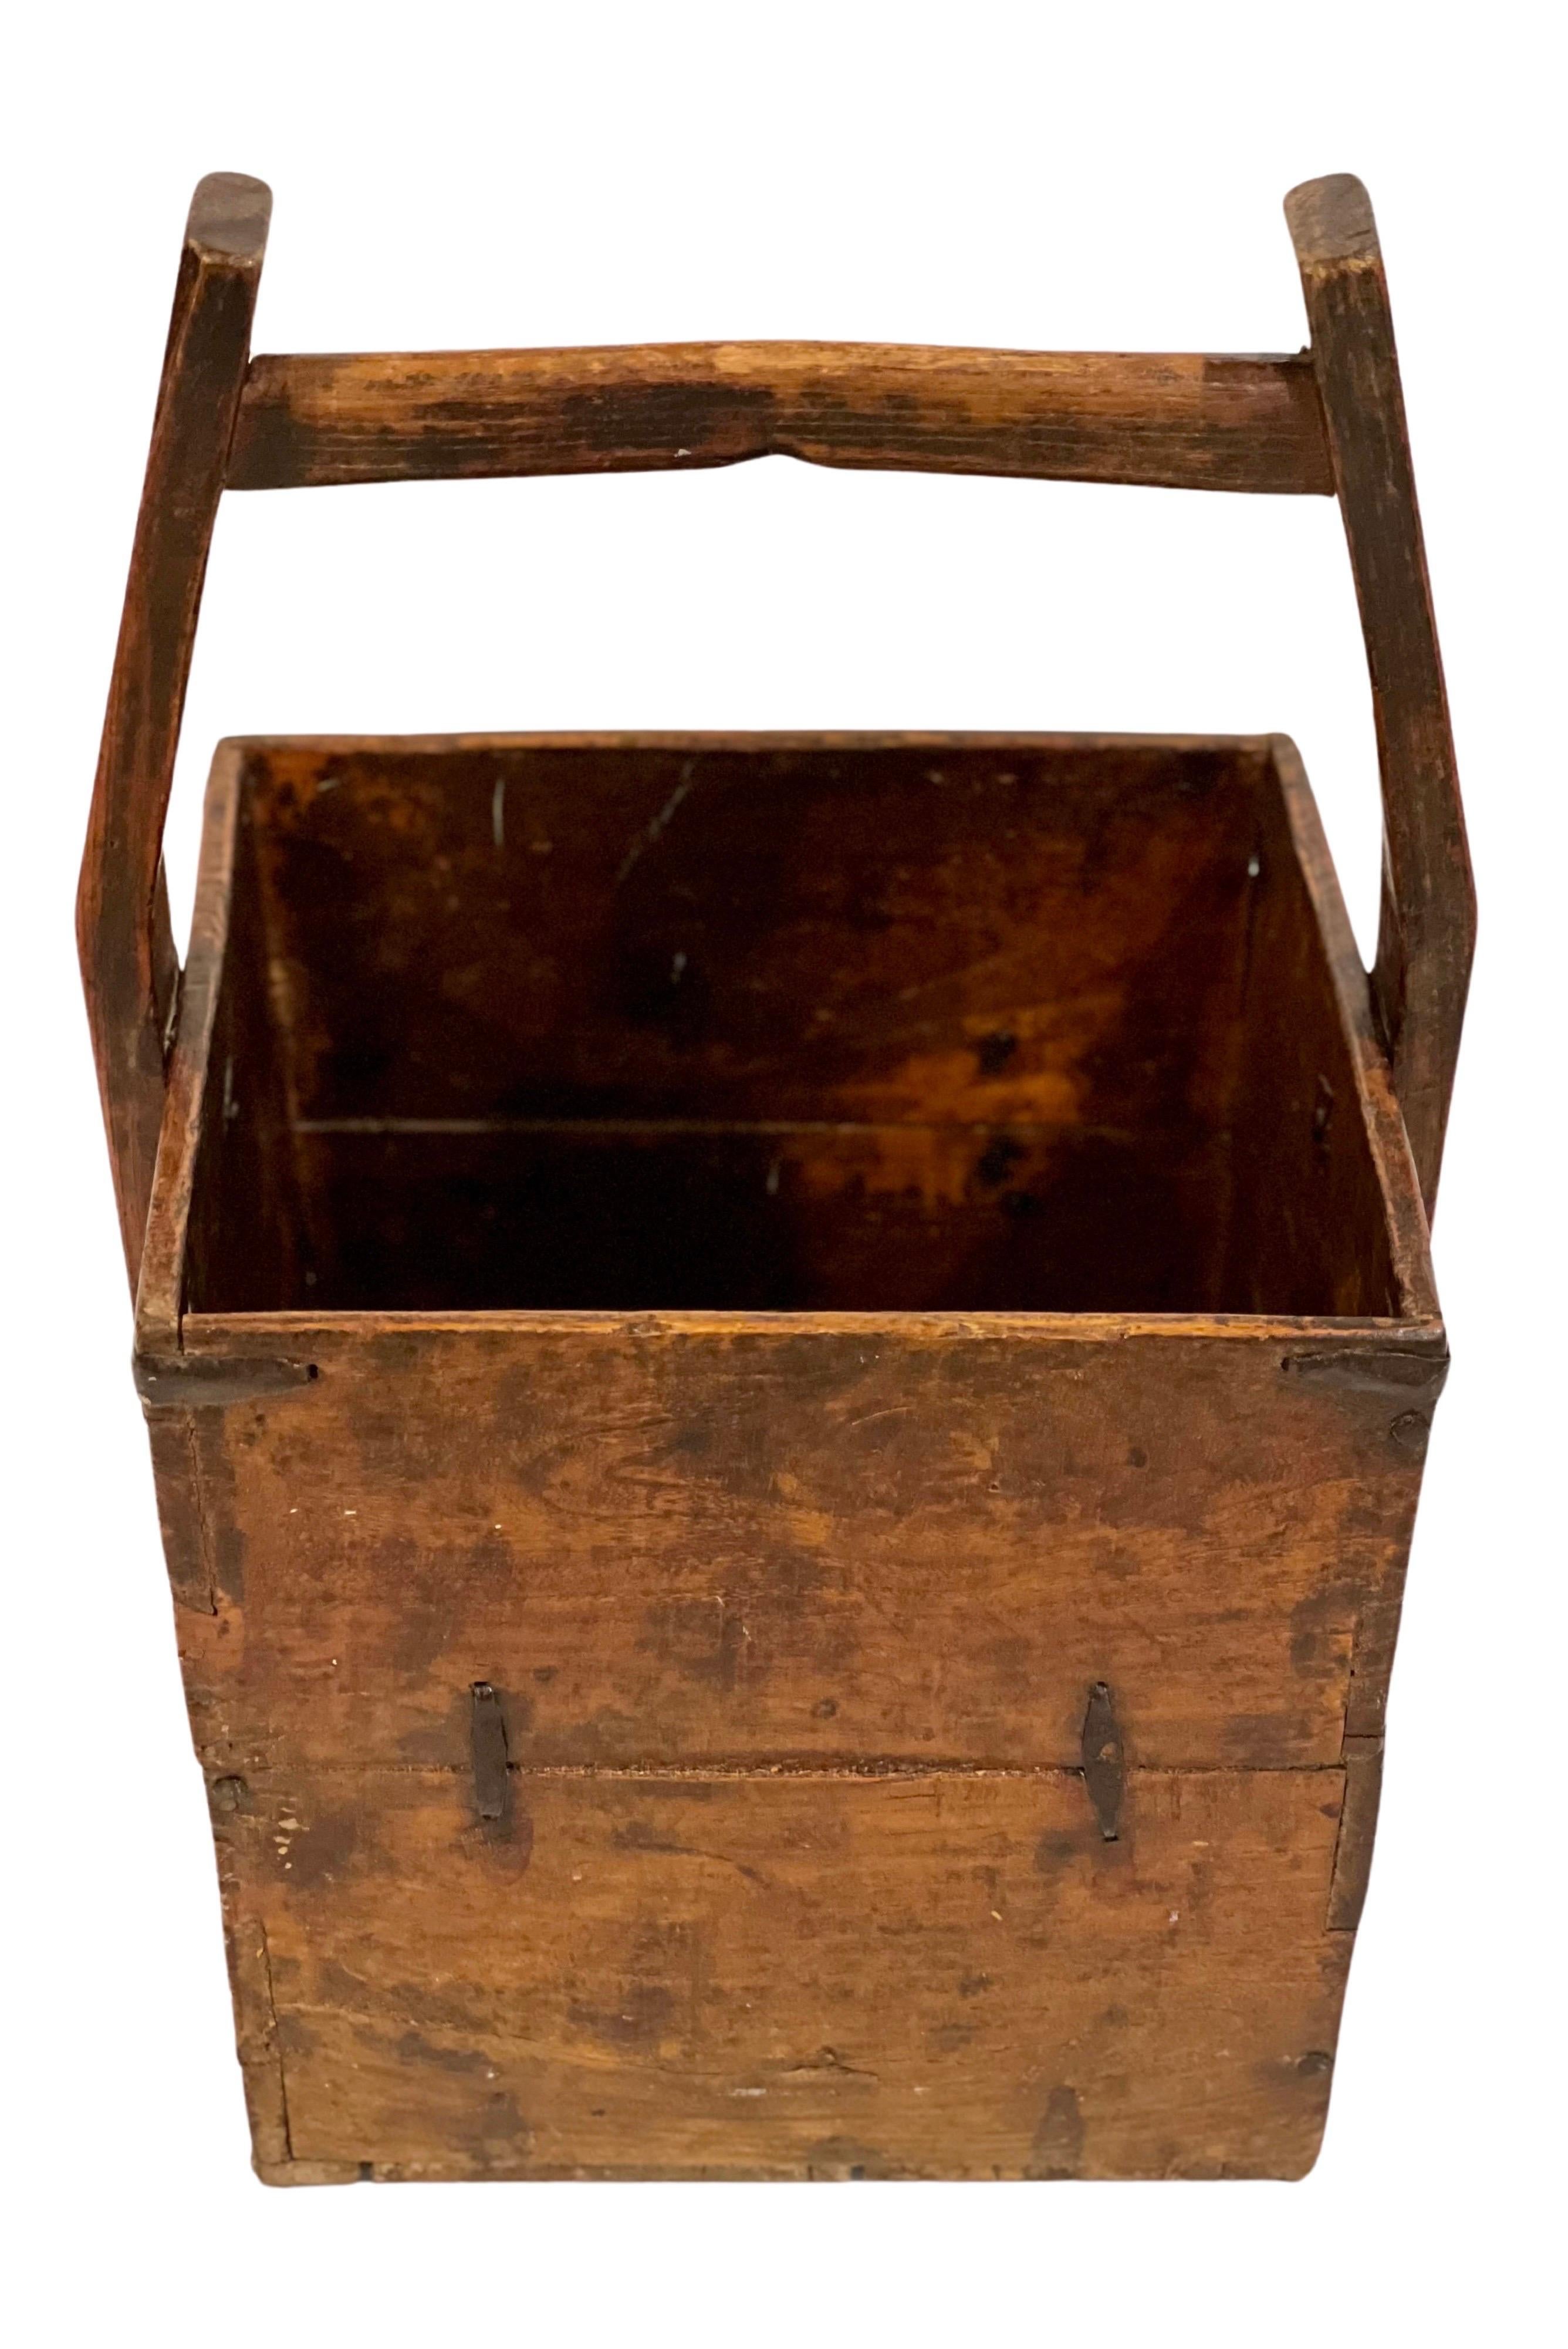 Antique Chinese rice harvest bucket, c. late 19th century.

Handcrafted, very sturdy elm bucket with original, hand-forged iron hardware reinforcements and dovetail construction. Also called a 